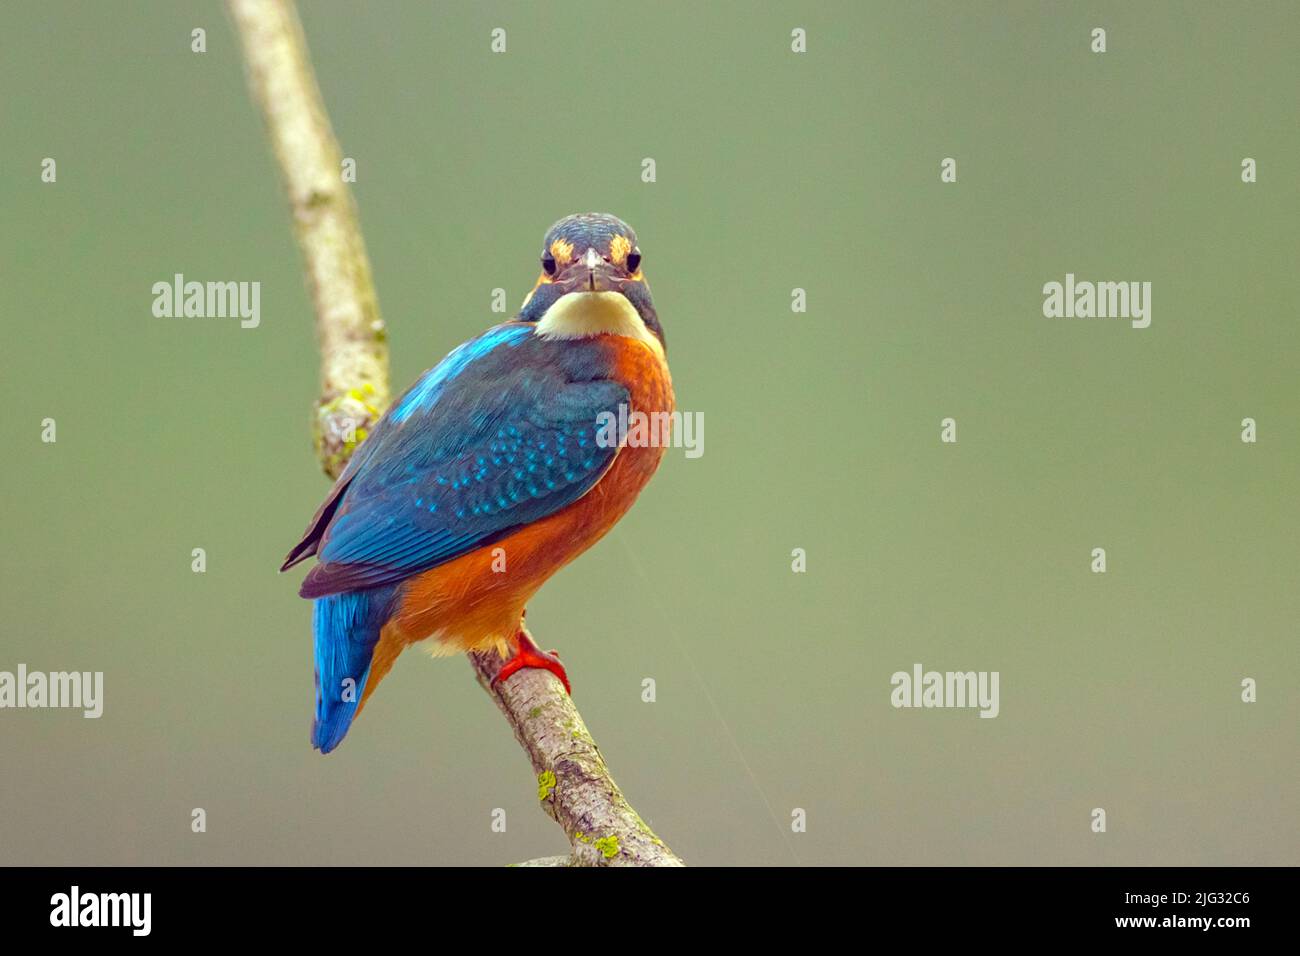 river kingfisher (Alcedo atthis), perched on a branch, eye contact, Germany Stock Photo